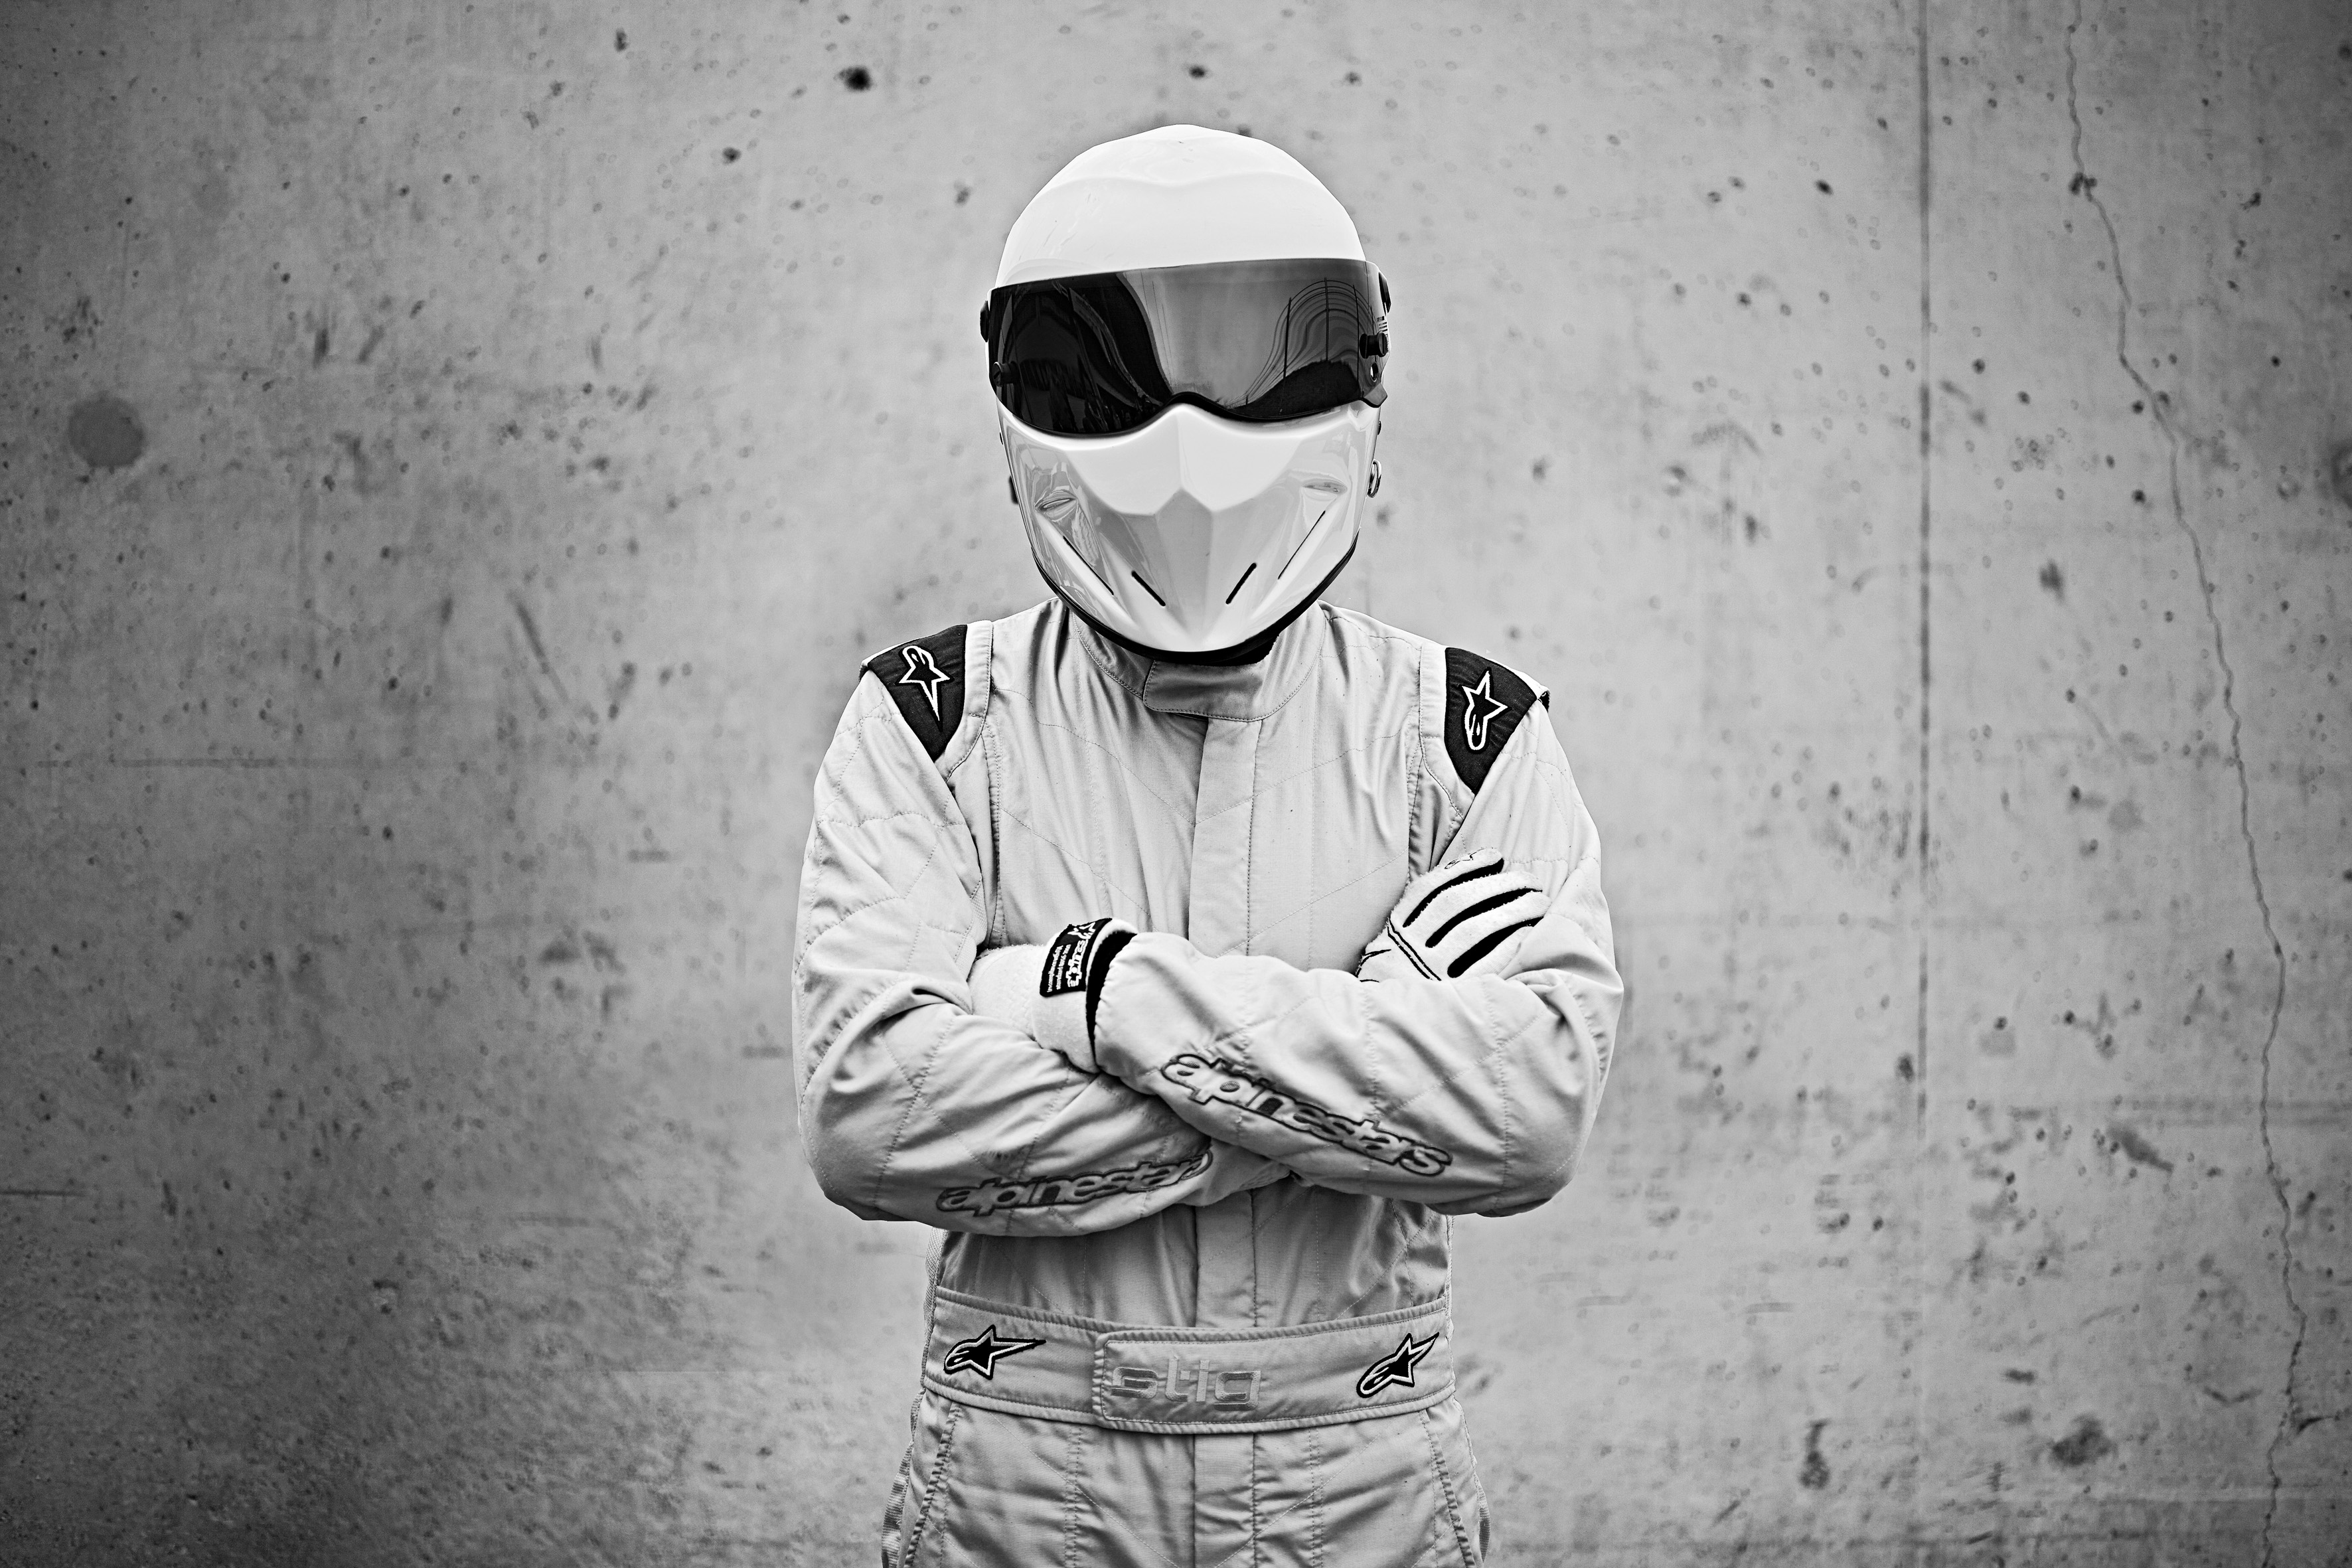 The Stig To Star In New TV Show 'The Getaway | TV - Conversations About HER